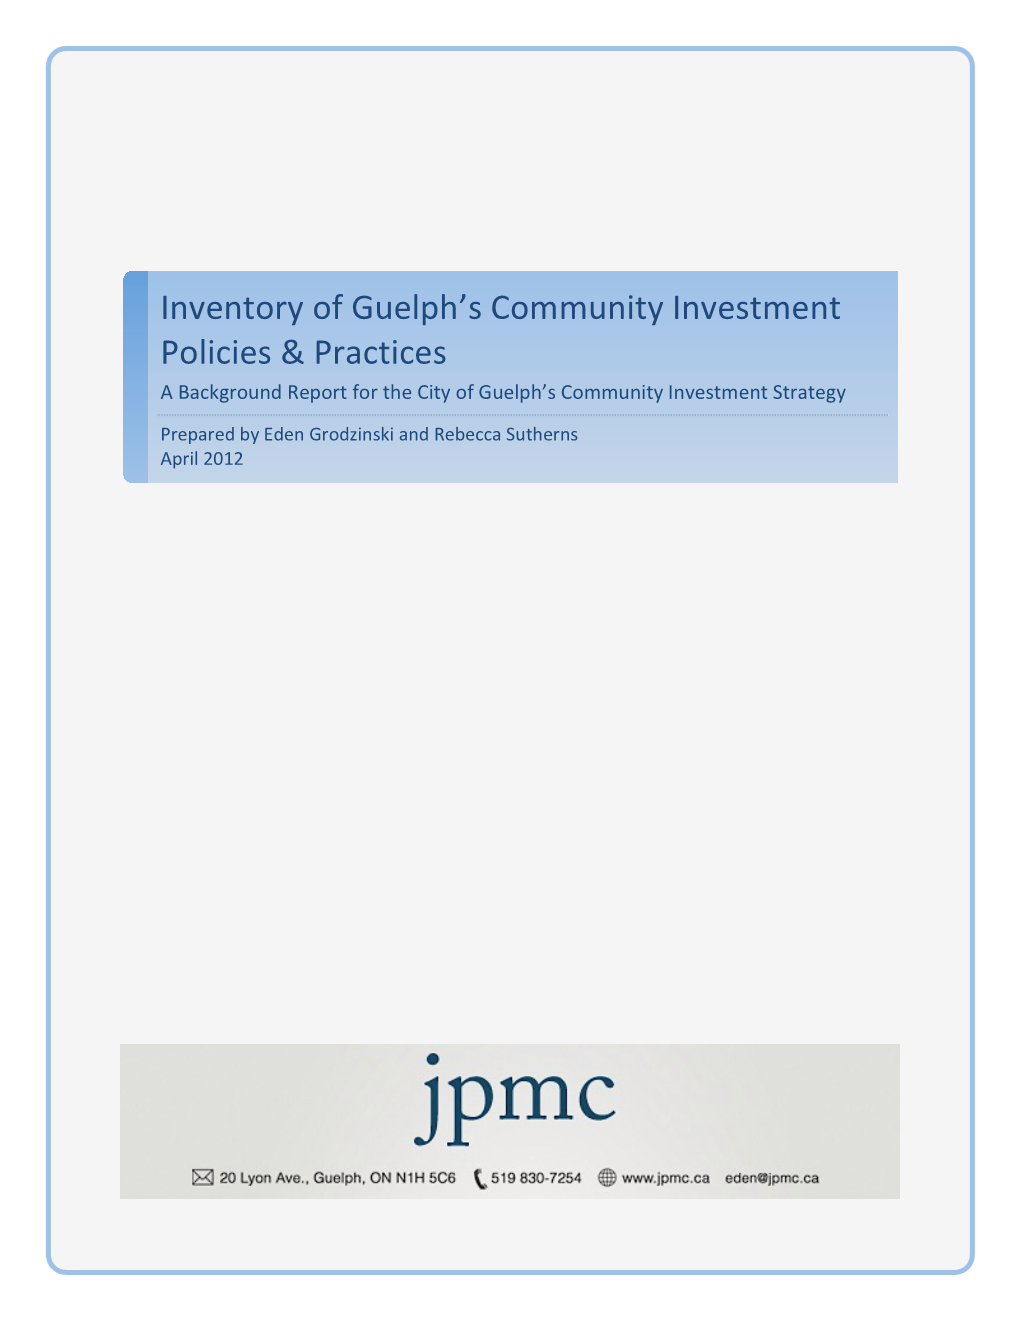 Inventory of Guelph's Community Investment Policies & Practices